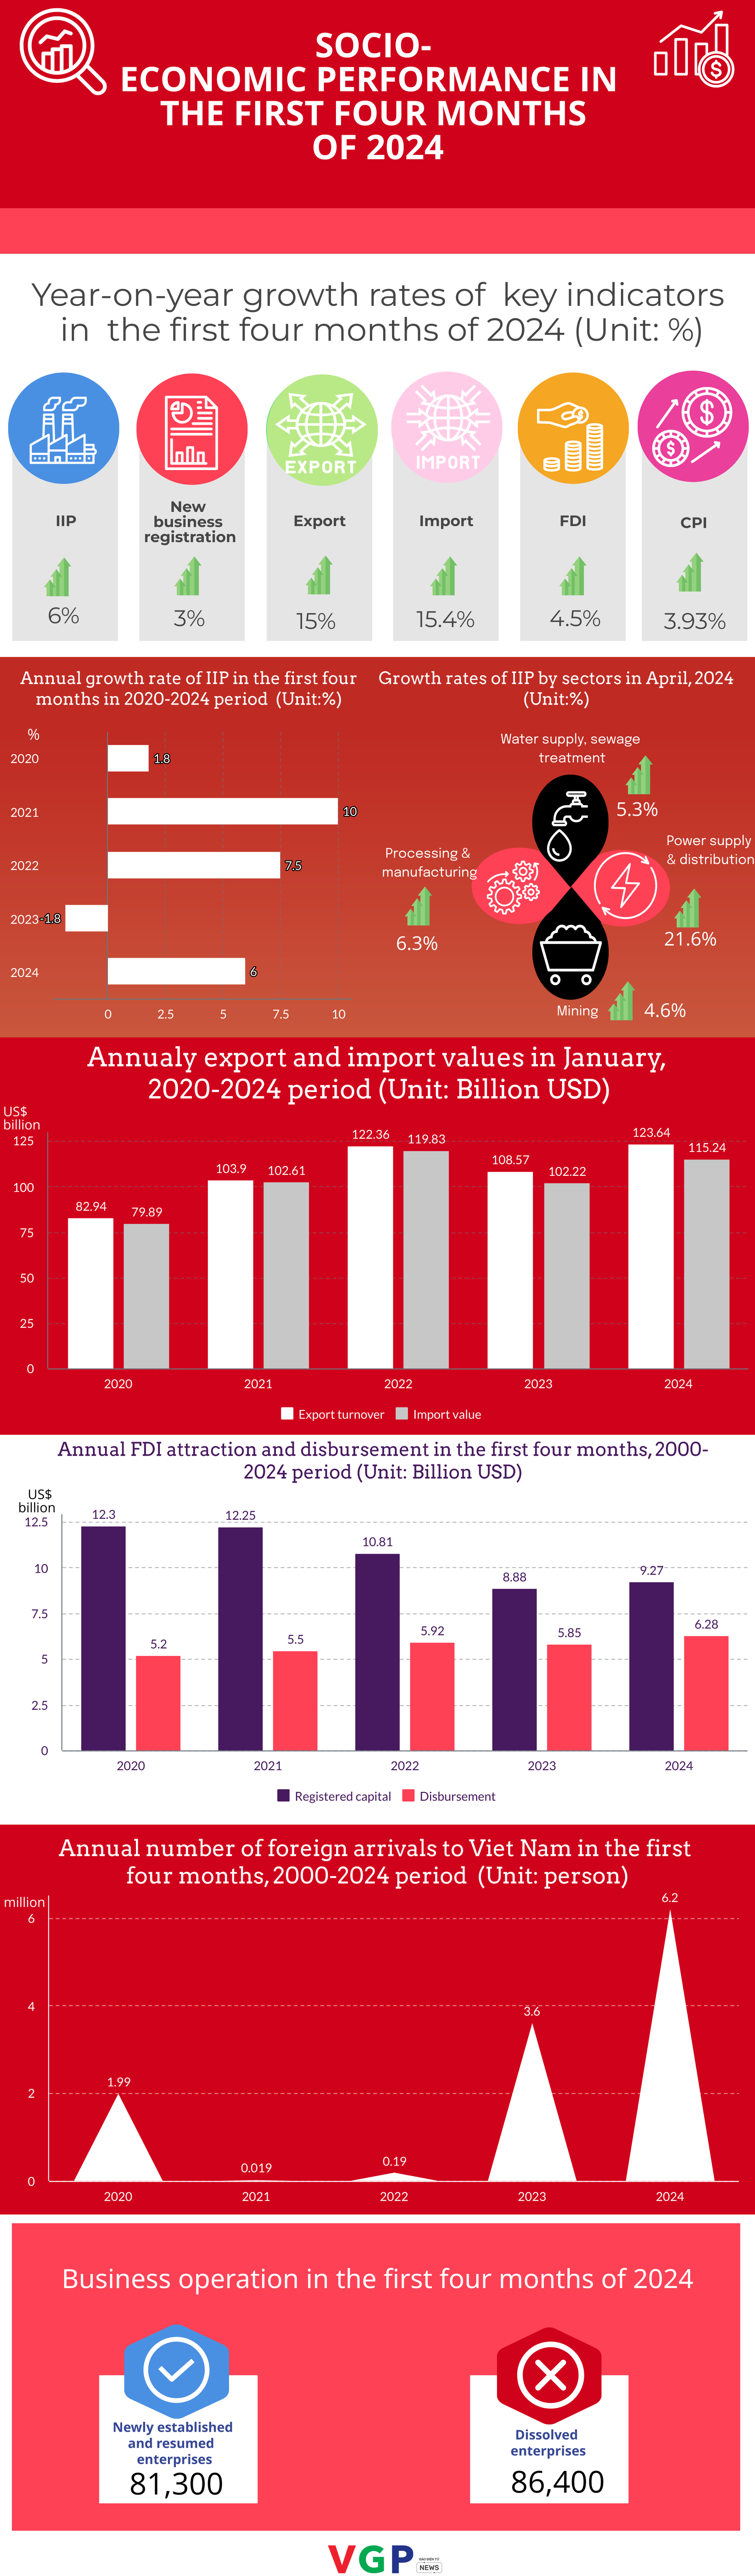 INFOGRAPHIC: SOCIAL-ECONOMIC PERFORMANCE IN FIRST FOUR MONTHS OF 2024- Ảnh 1.